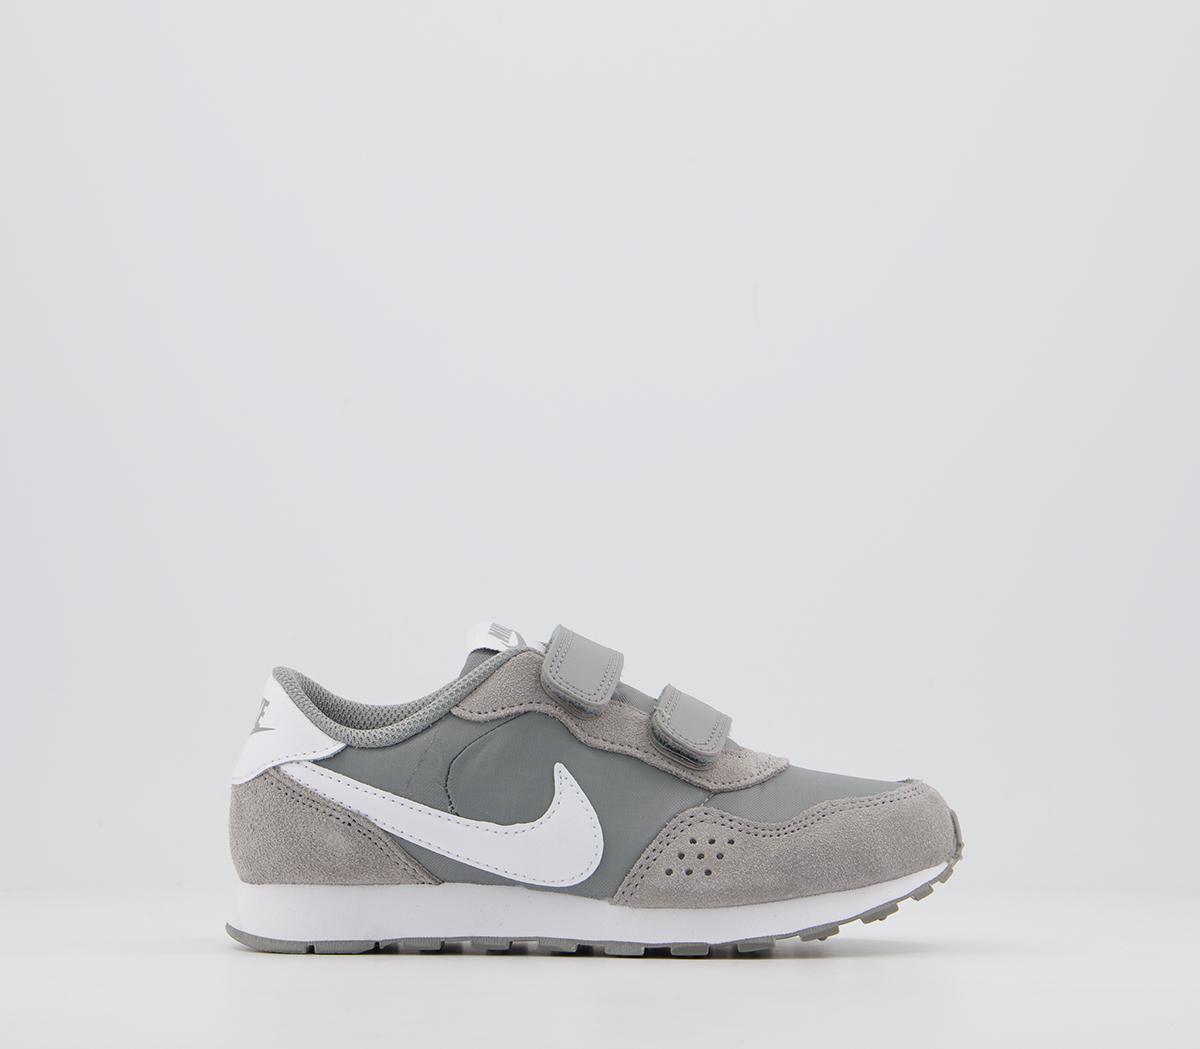 NikeMd Valiant Youth TrainersParticle Grey White